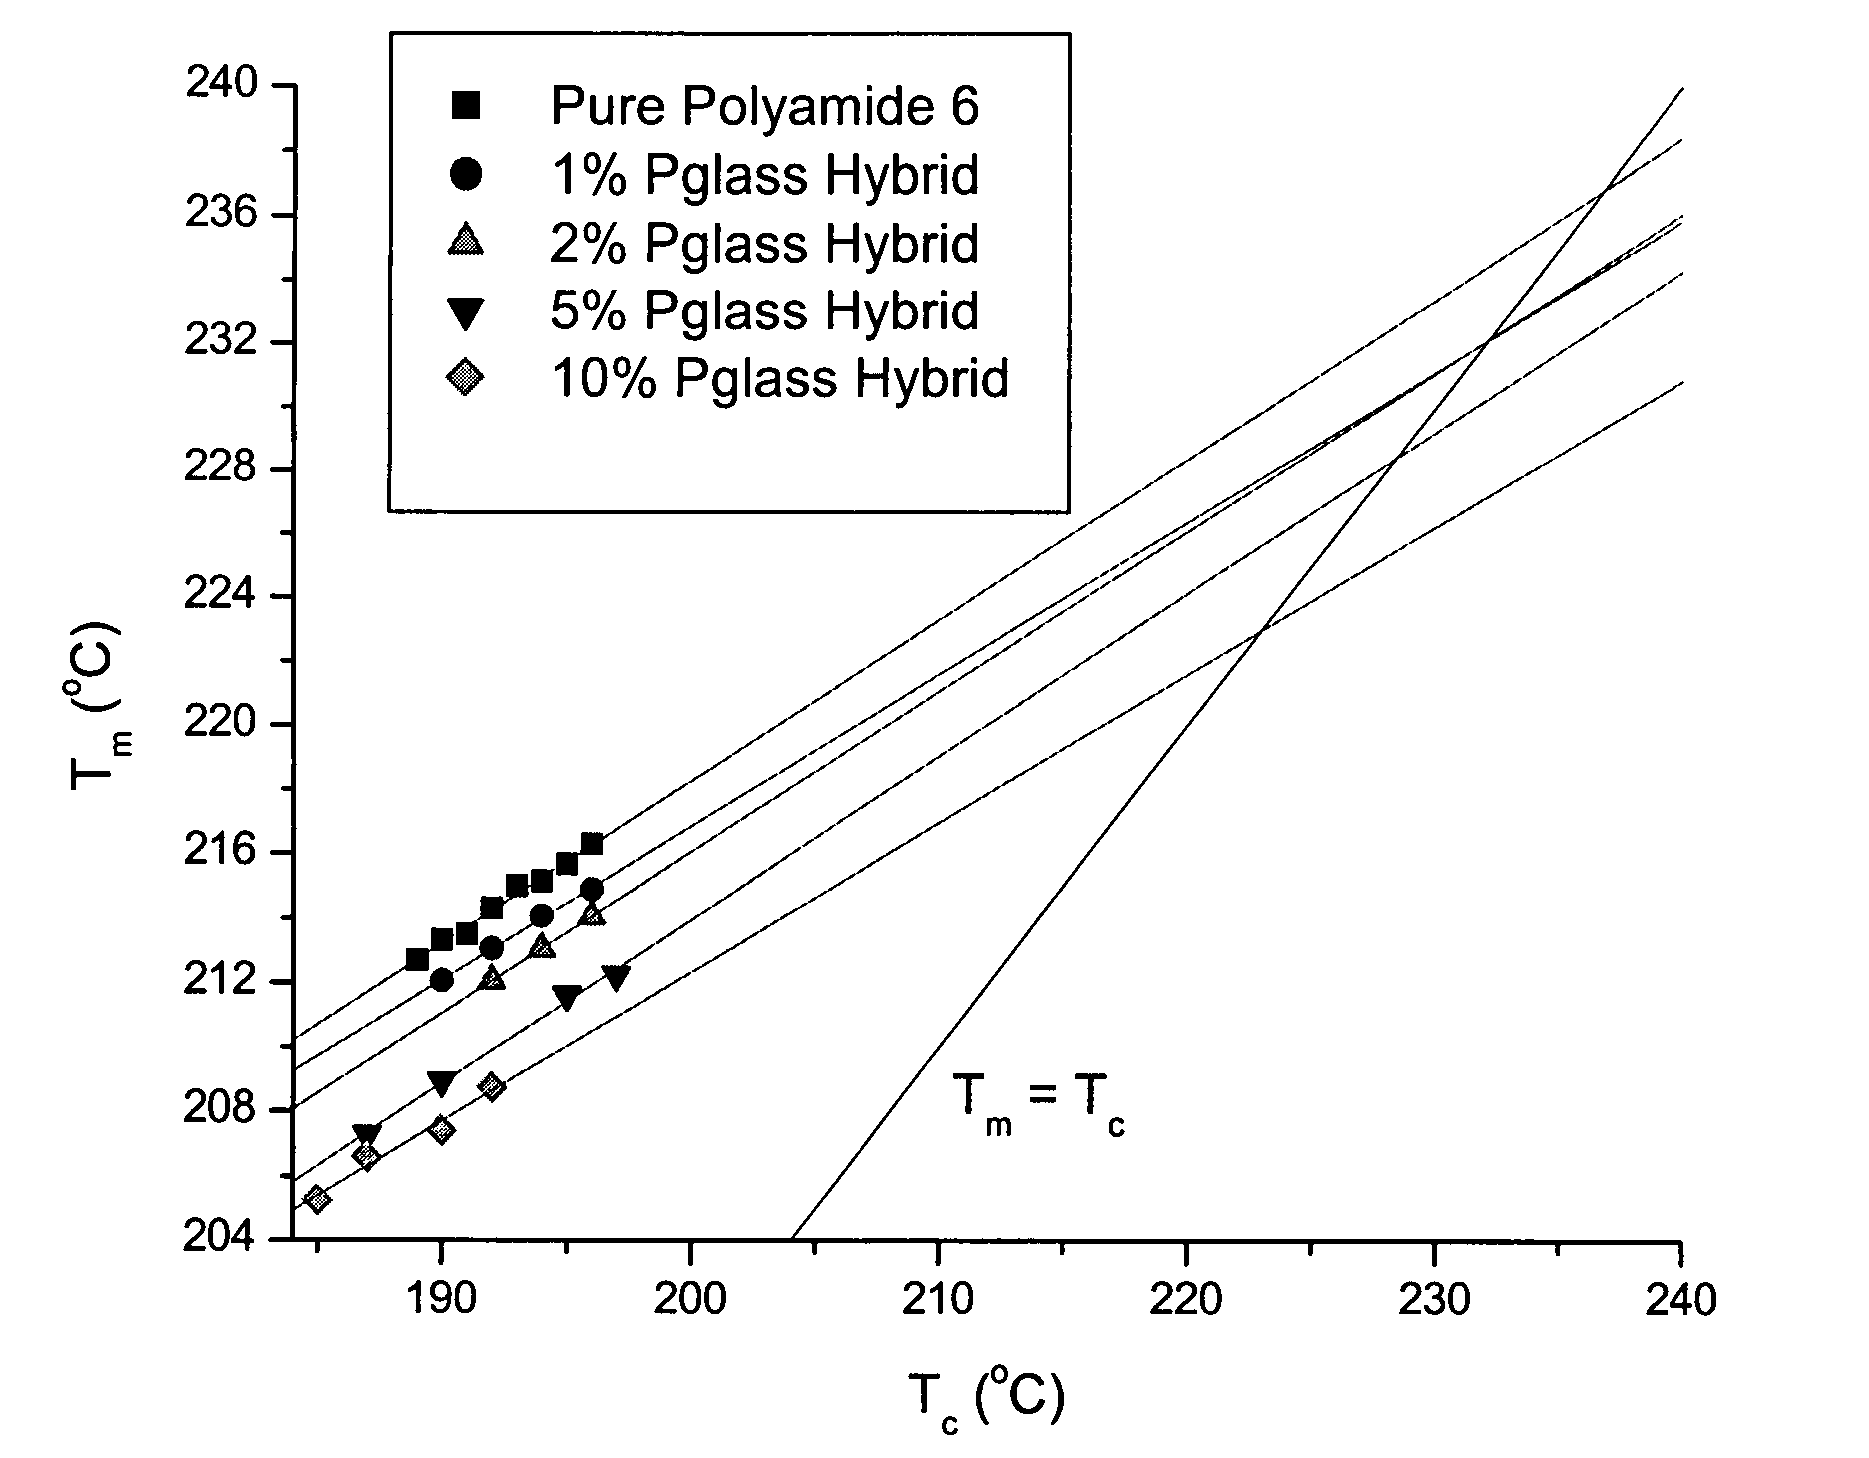 Polyphosphate glasses as a plasticizer for nylon